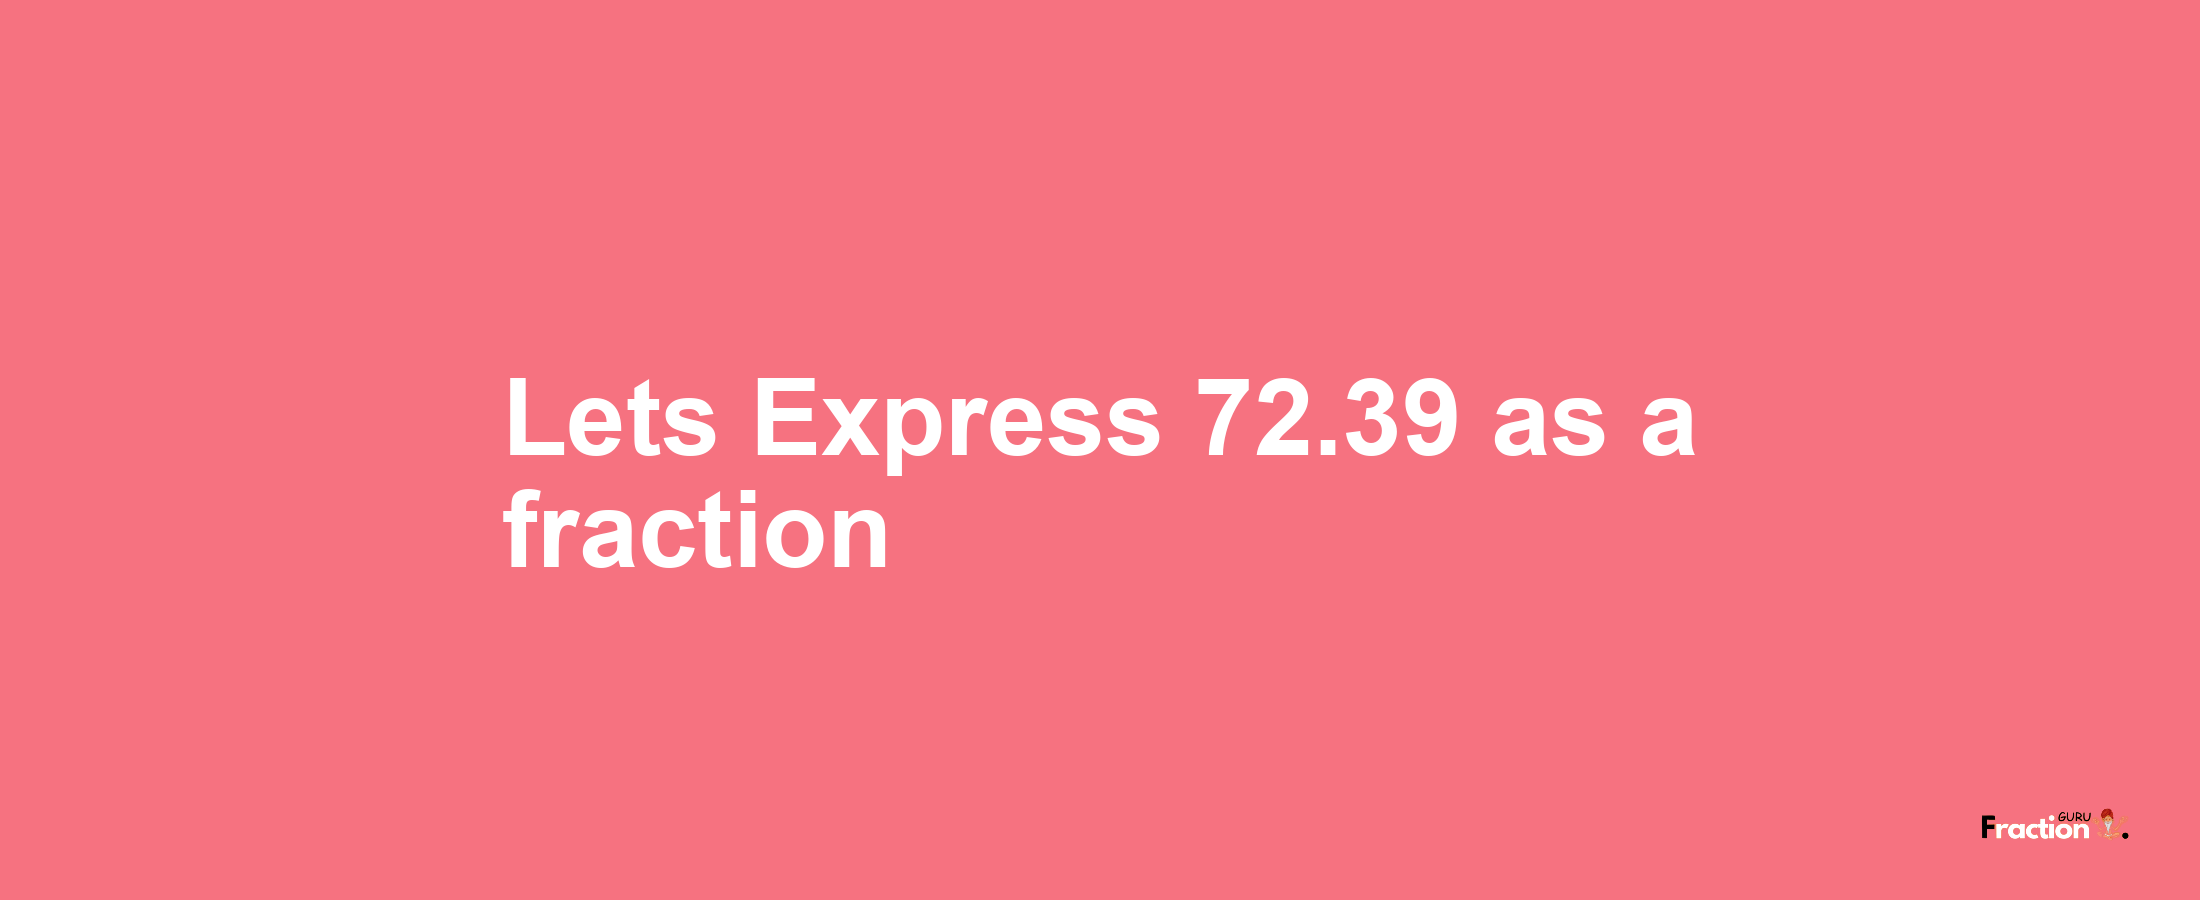 Lets Express 72.39 as afraction